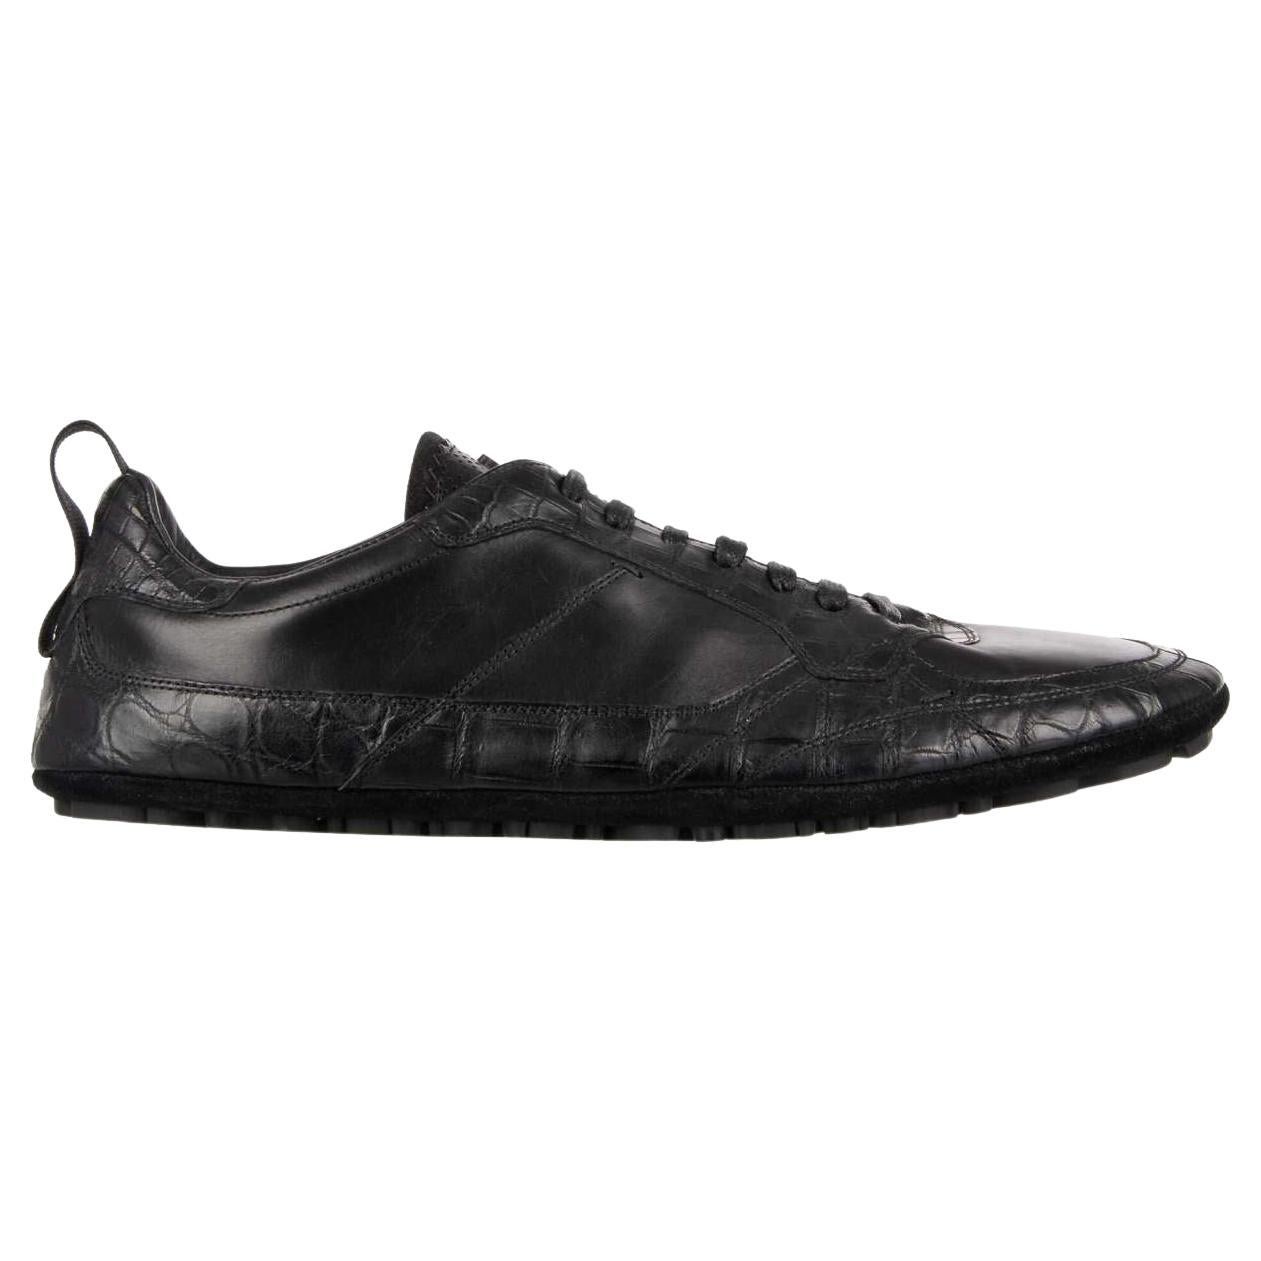 Dolce & Gabbana Low-Top Croco Sneaker KING DRIVER with Crown Black 44 UK 10 For Sale